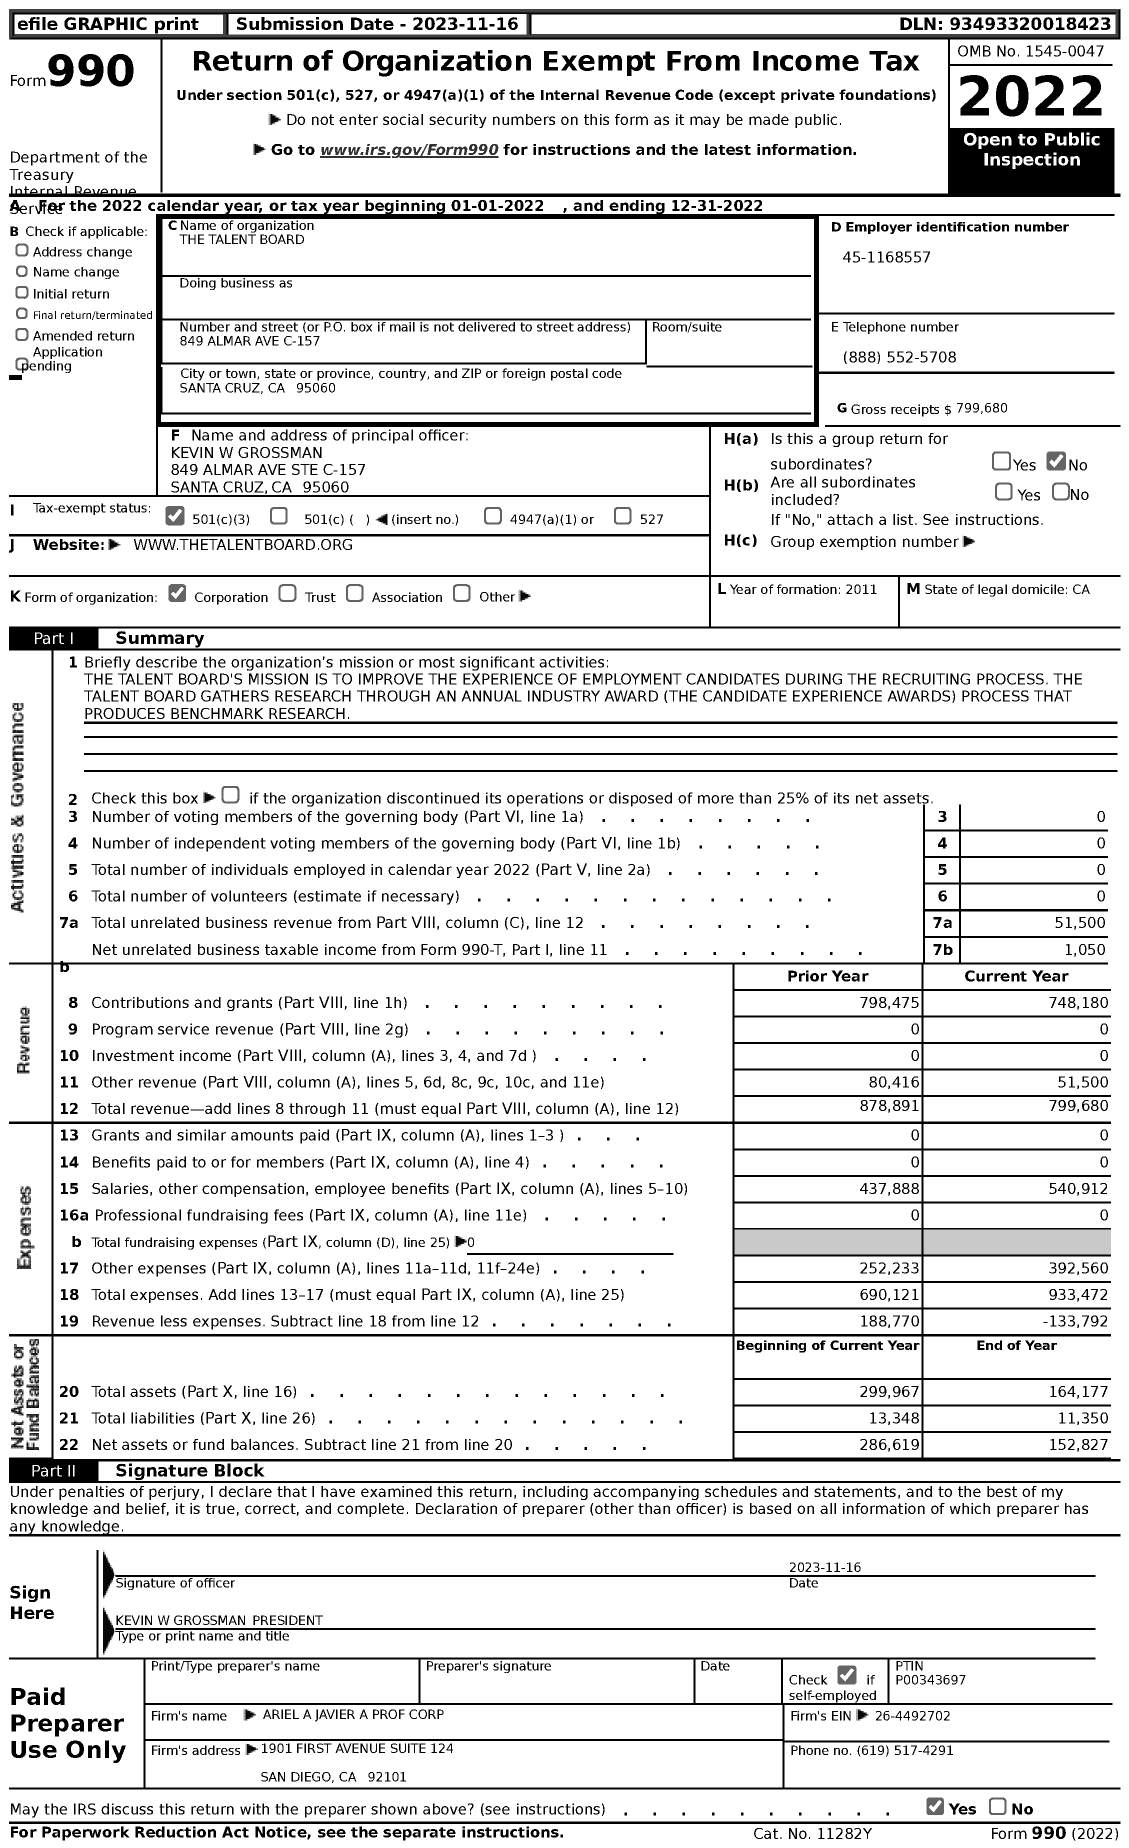 Image of first page of 2022 Form 990 for The Talent Board